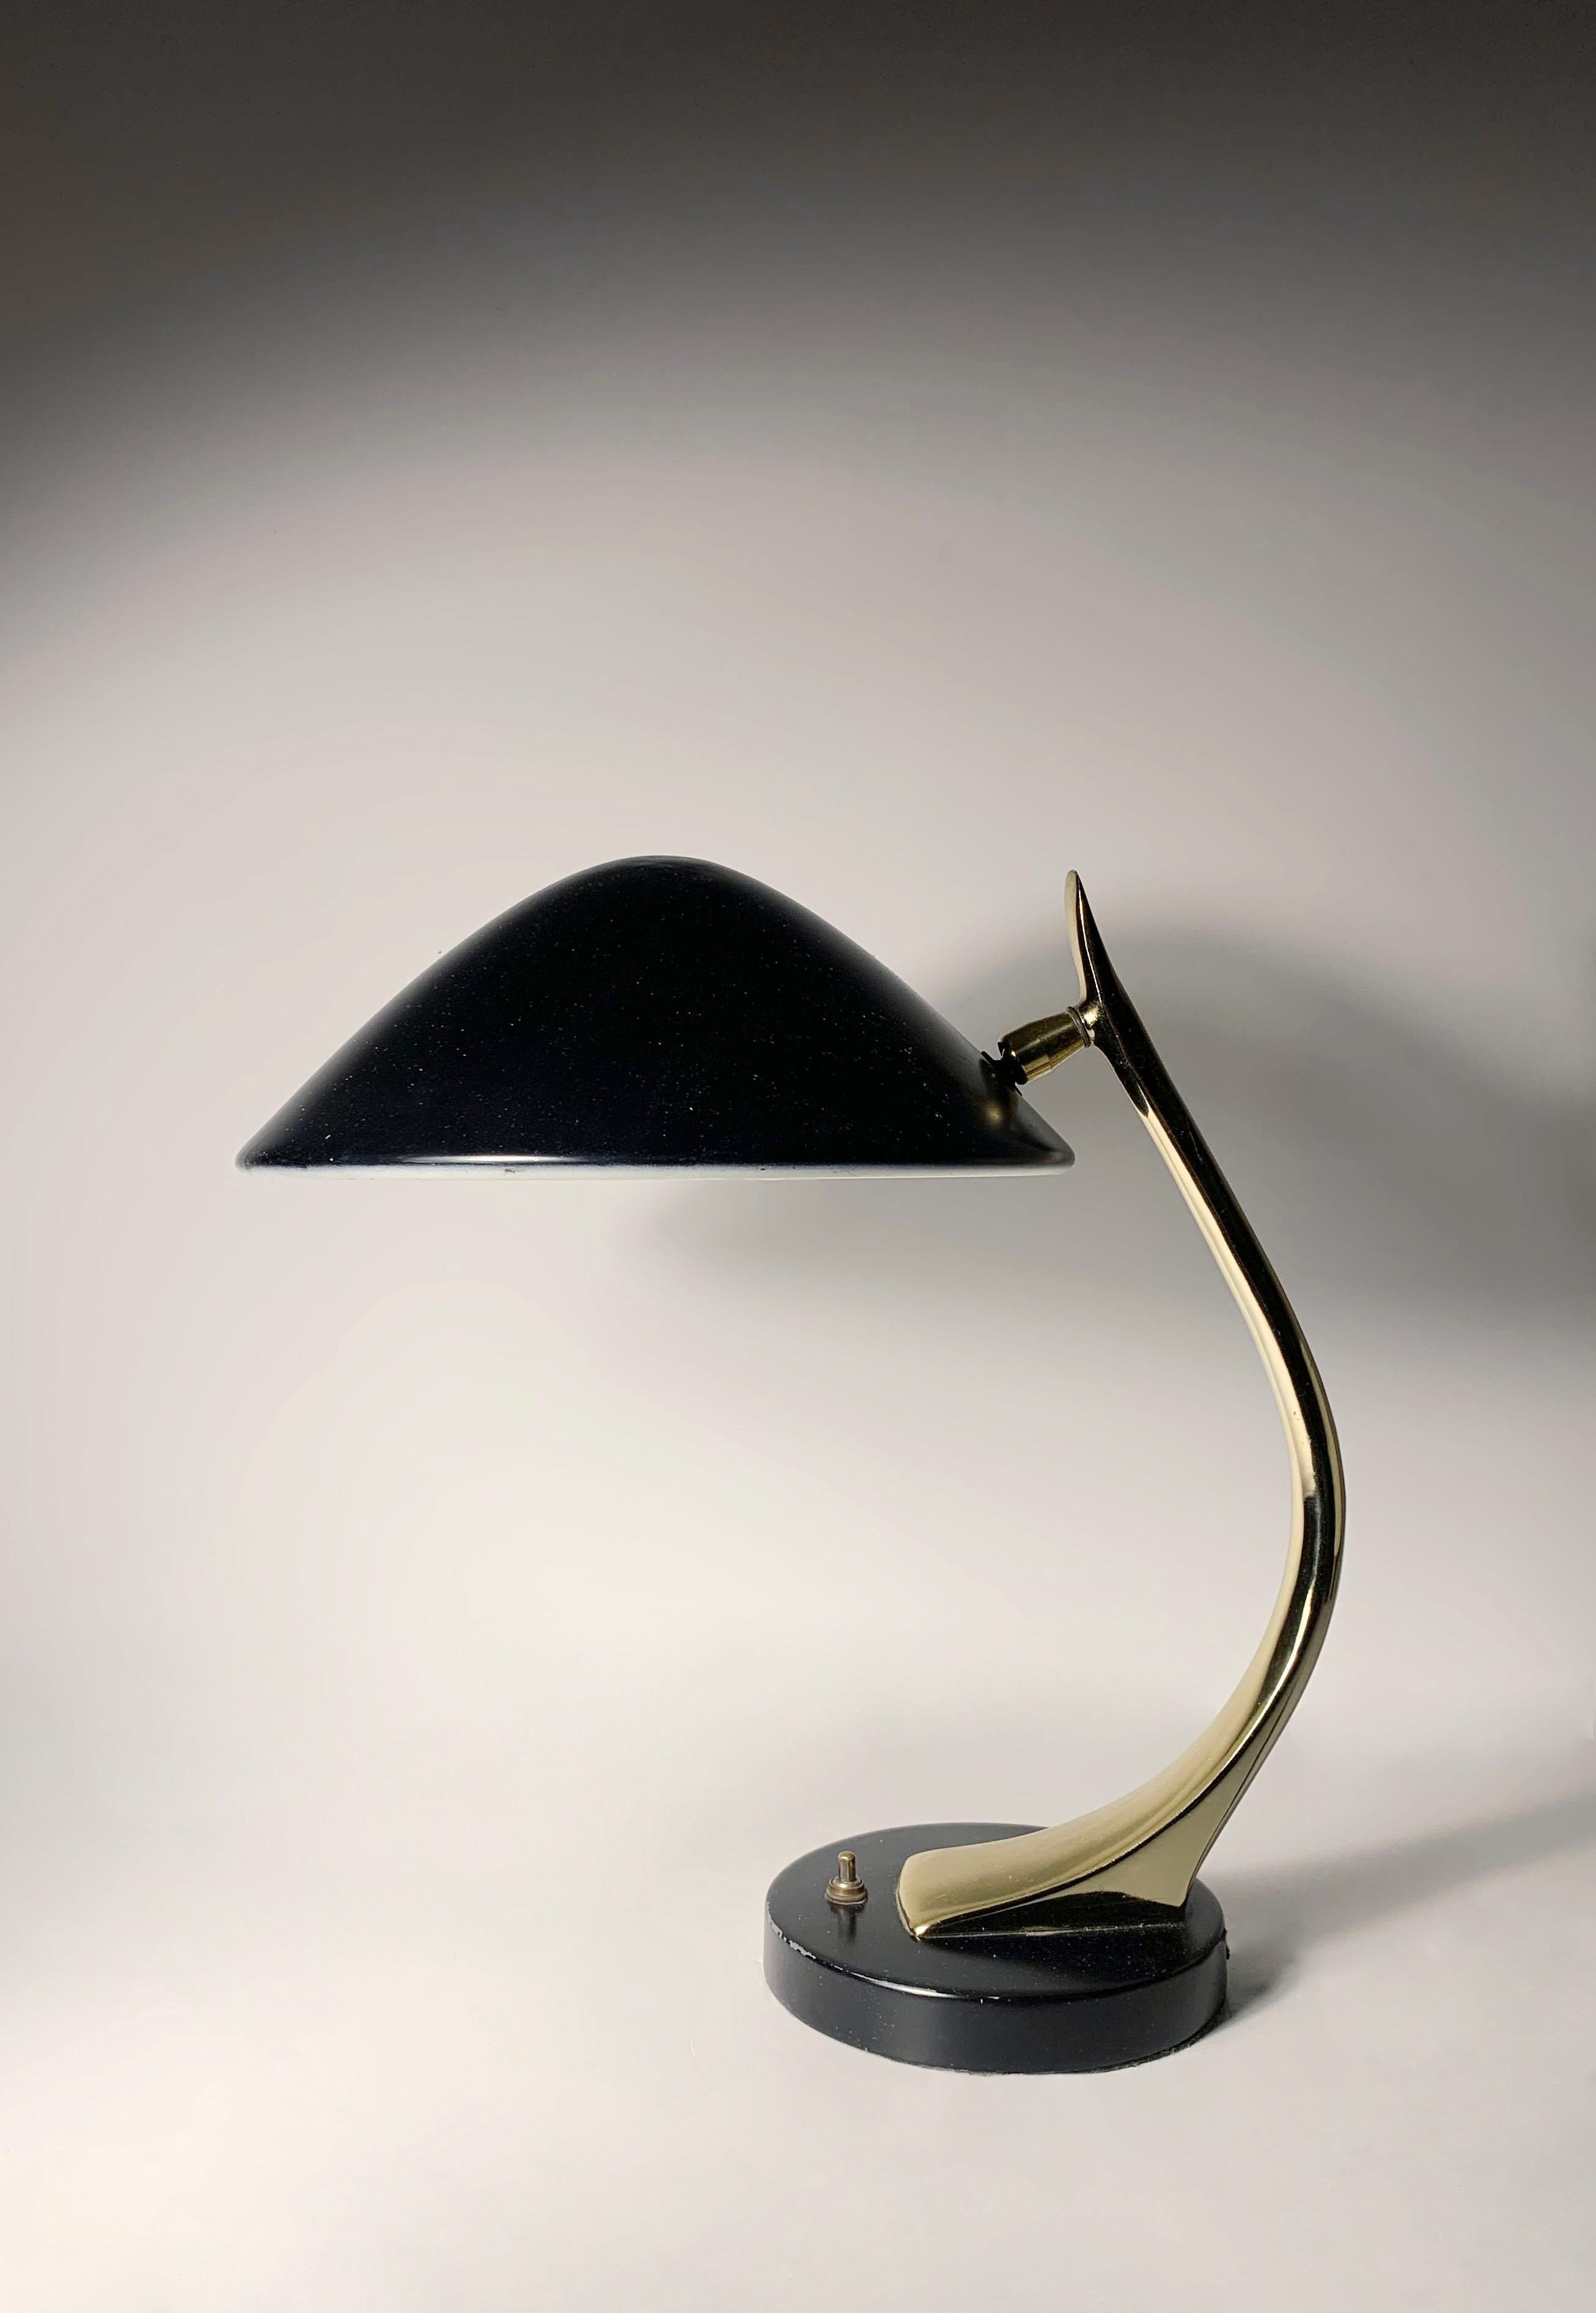 The sensual little desk lamp I am fairly certain to be by Harold Barr and Richard Weiss for the Laurel Lamp. In the manner of Maurizio Tempestini.